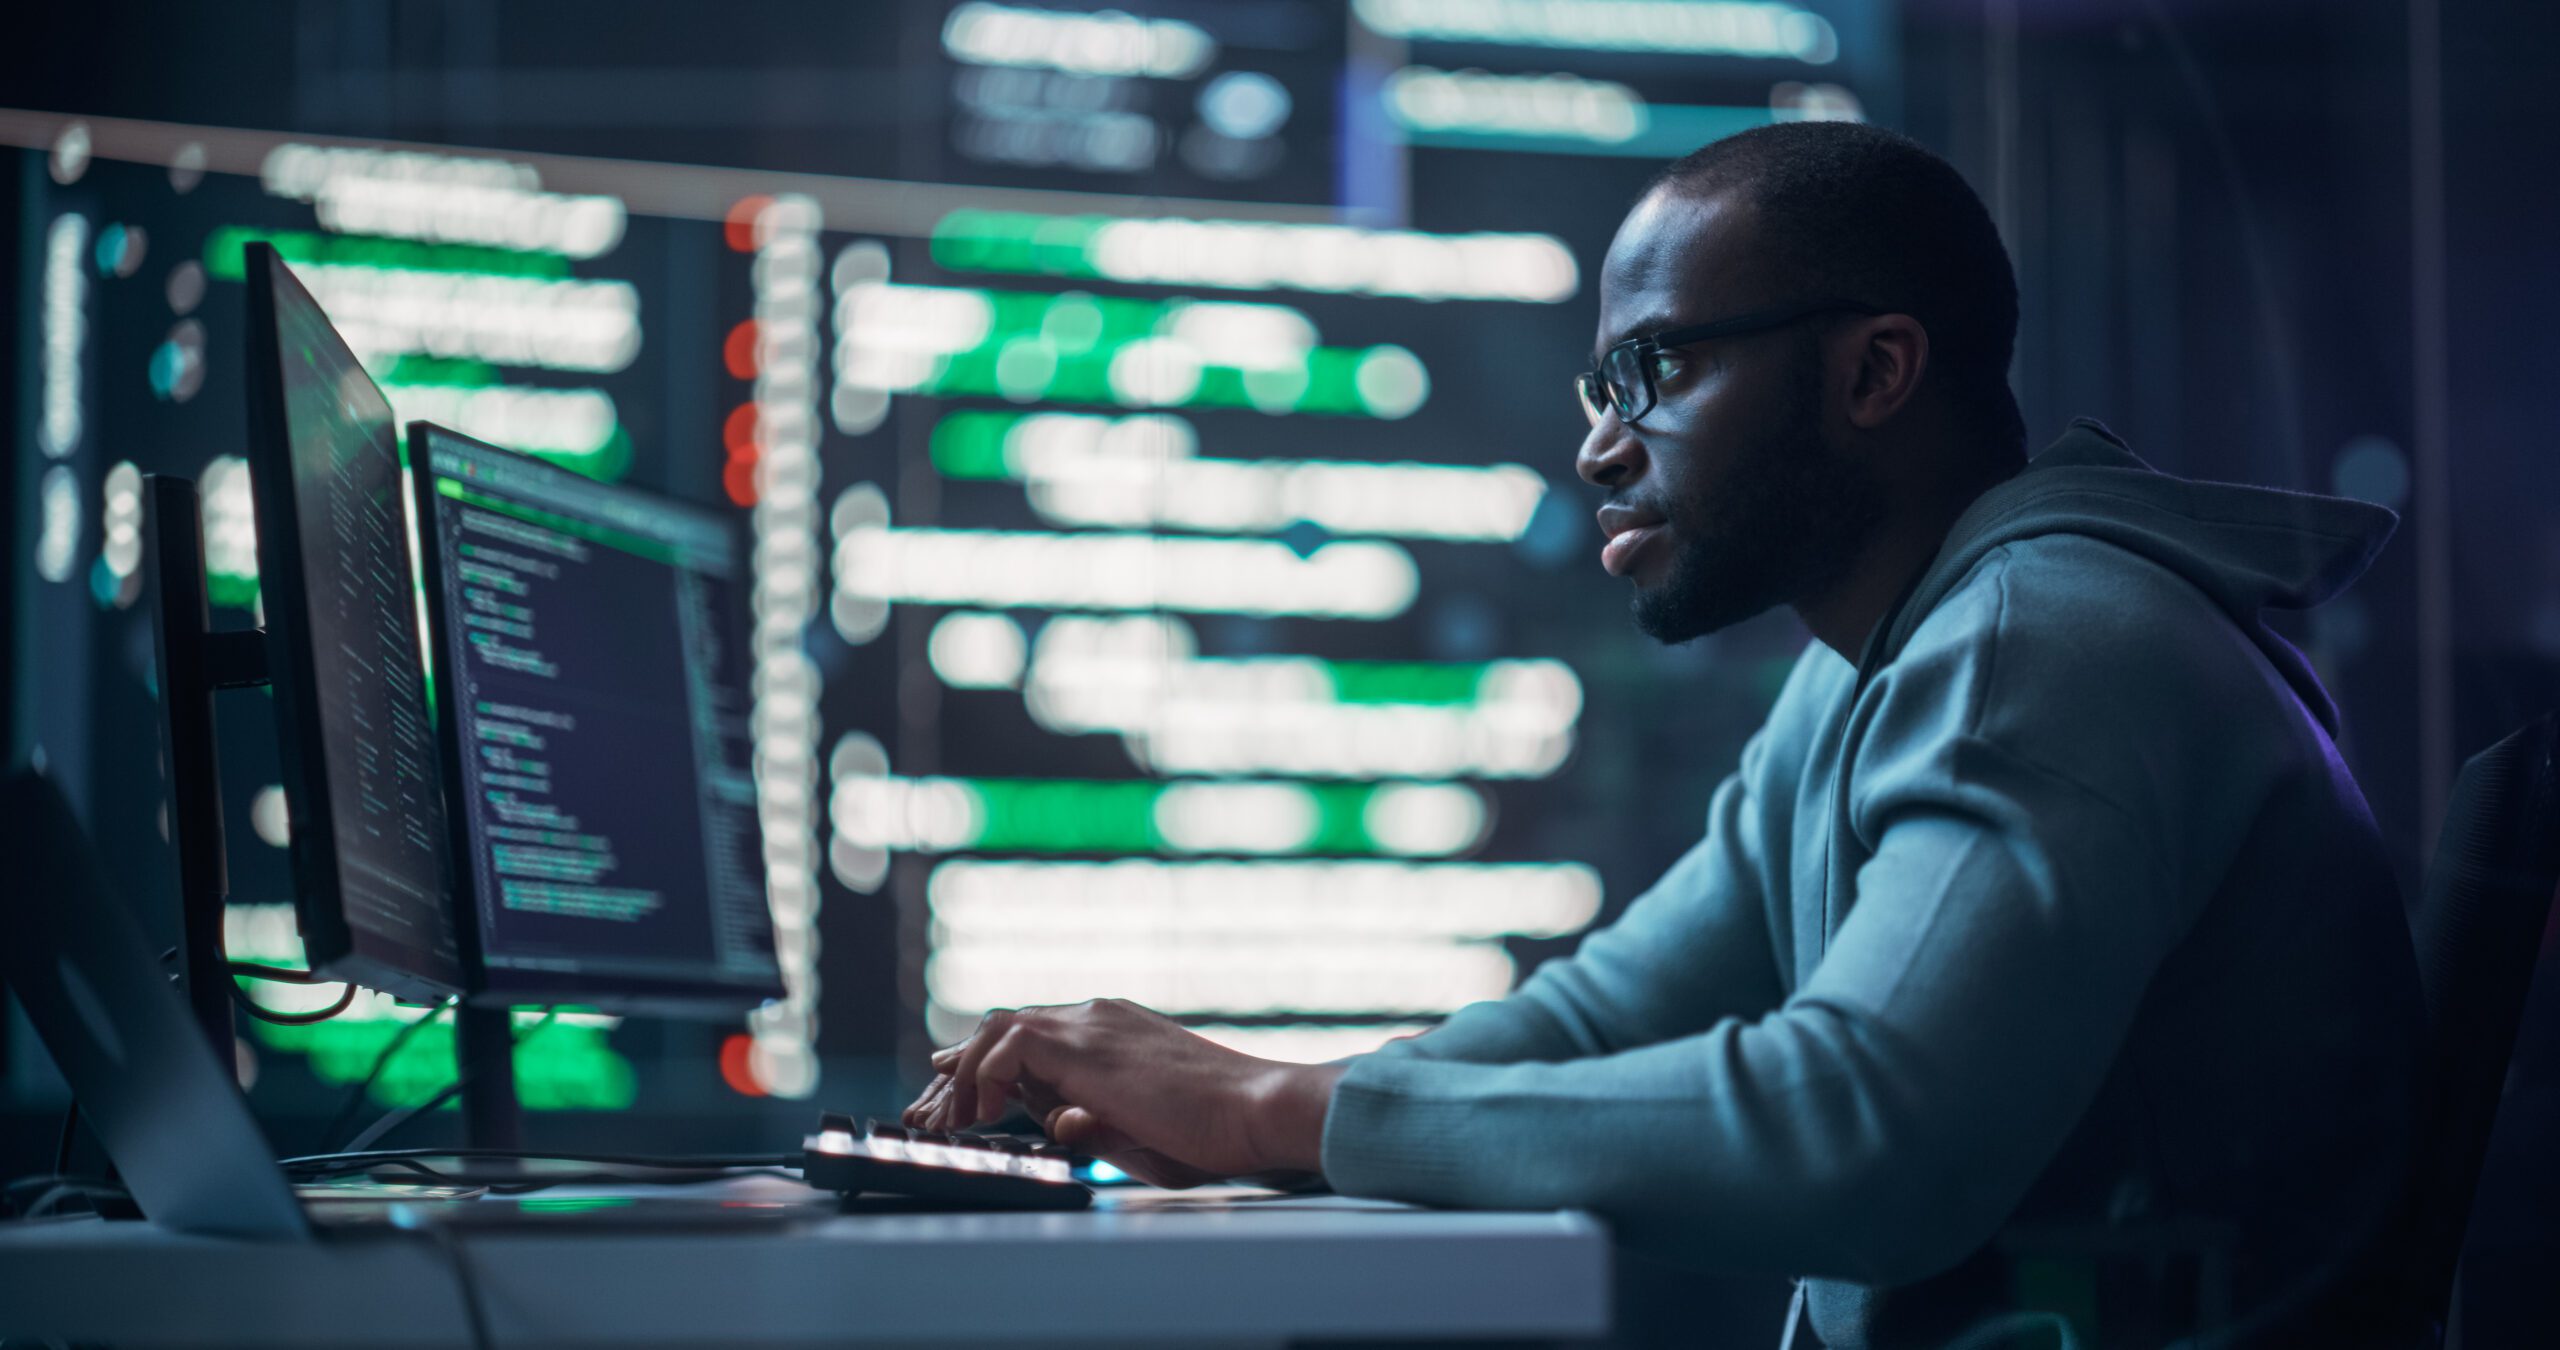 Focused Black Male Programmer Working in Monitoring Room, Surrounded by Big Screens Displaying Lines of Programming Language Code. Portrait of Man Creating Software. Futuristic Coding Concept.